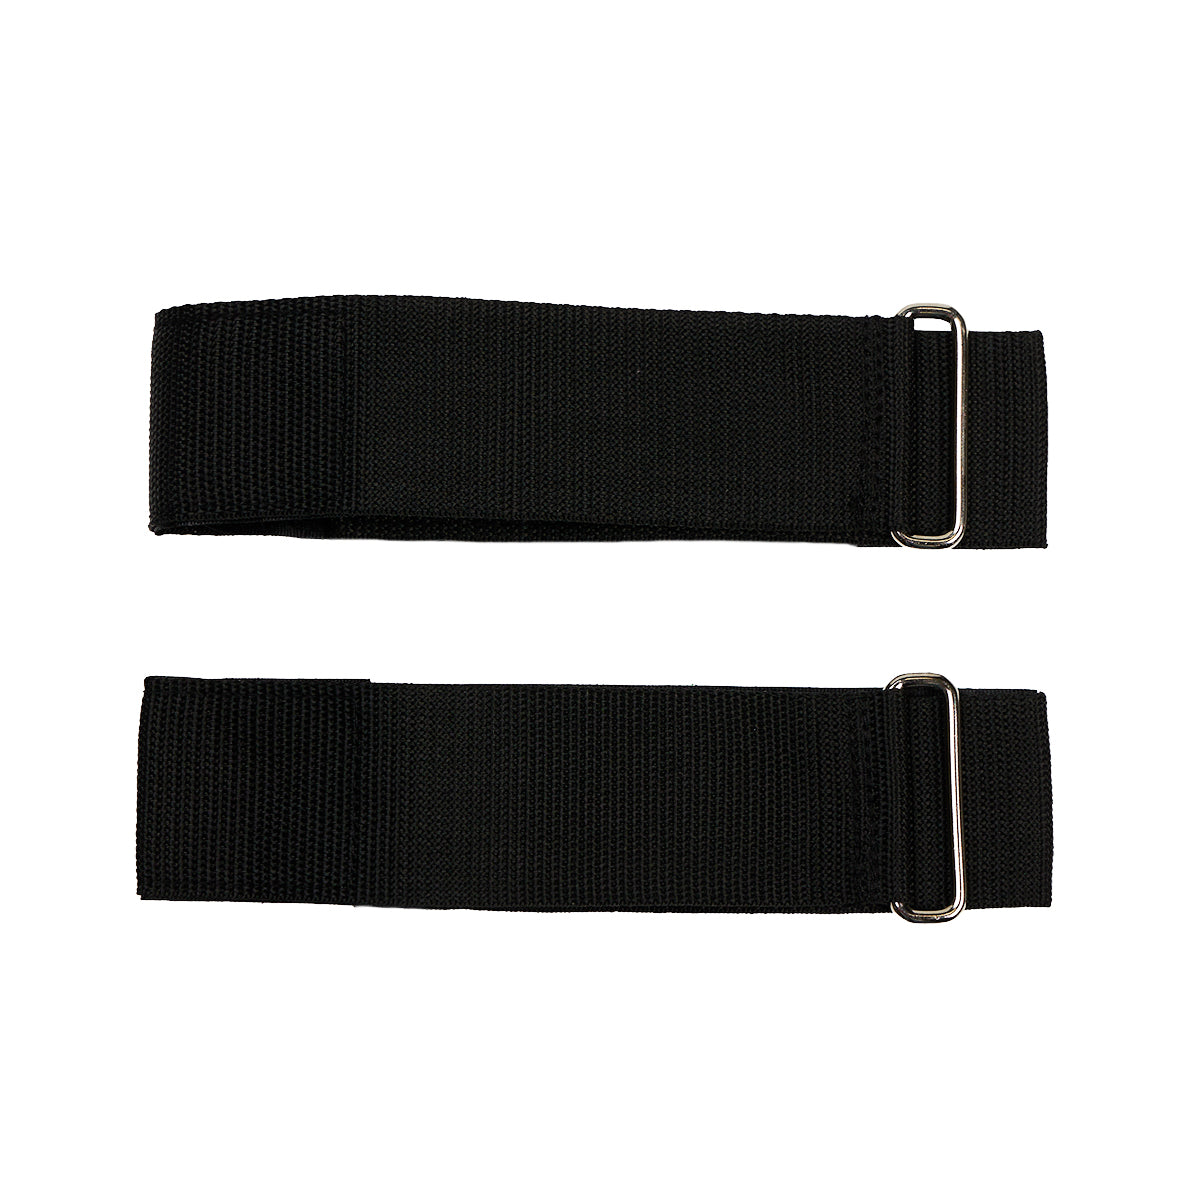 Rower Pedal Straps